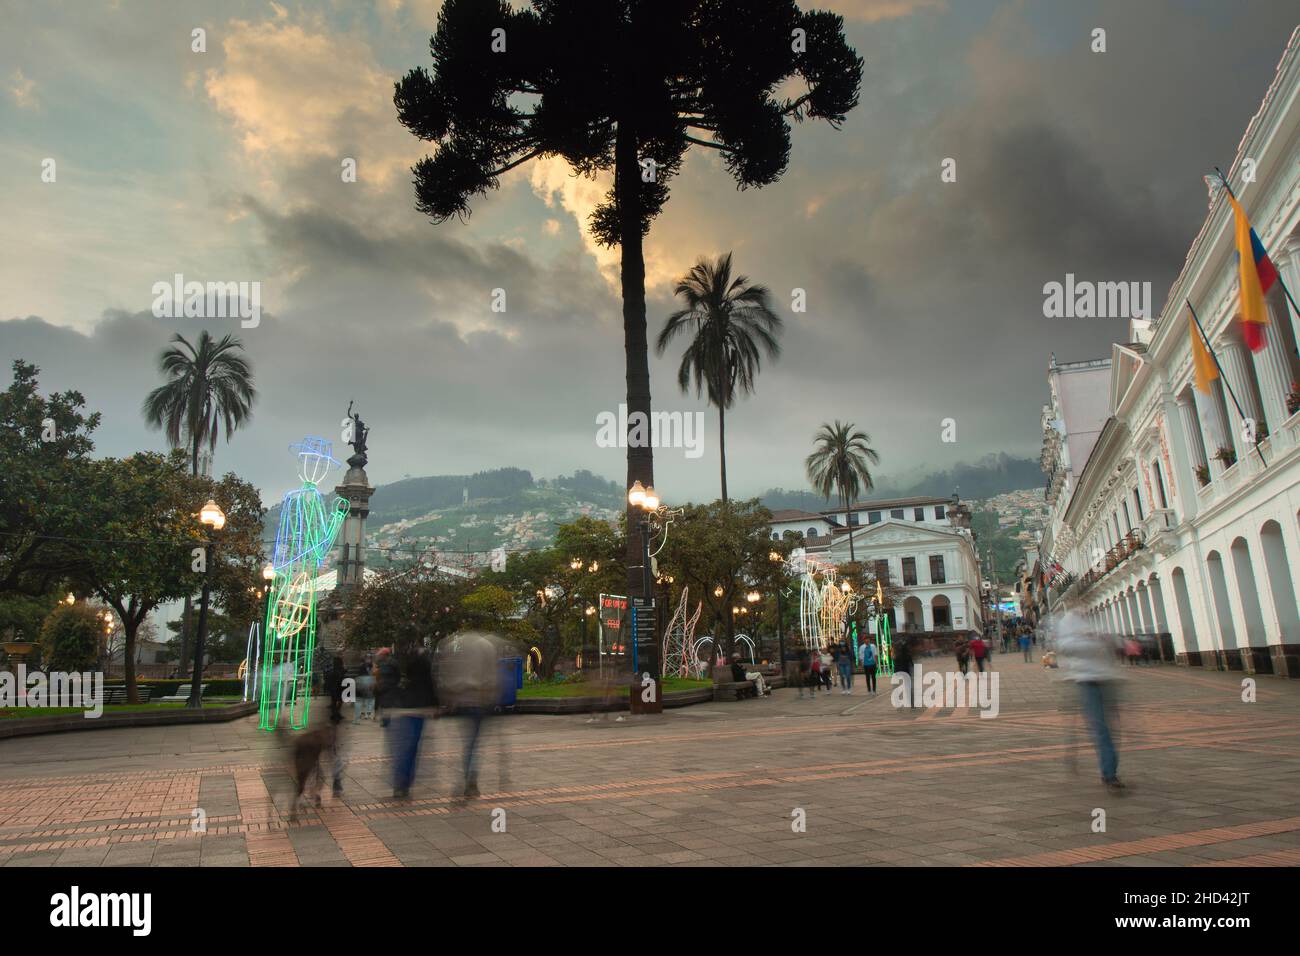 Quito, Pichincha, Ecuador - January 1 2022: Tourists walking in the big square with Christmas decorations located in the historic center of the city o Stock Photo